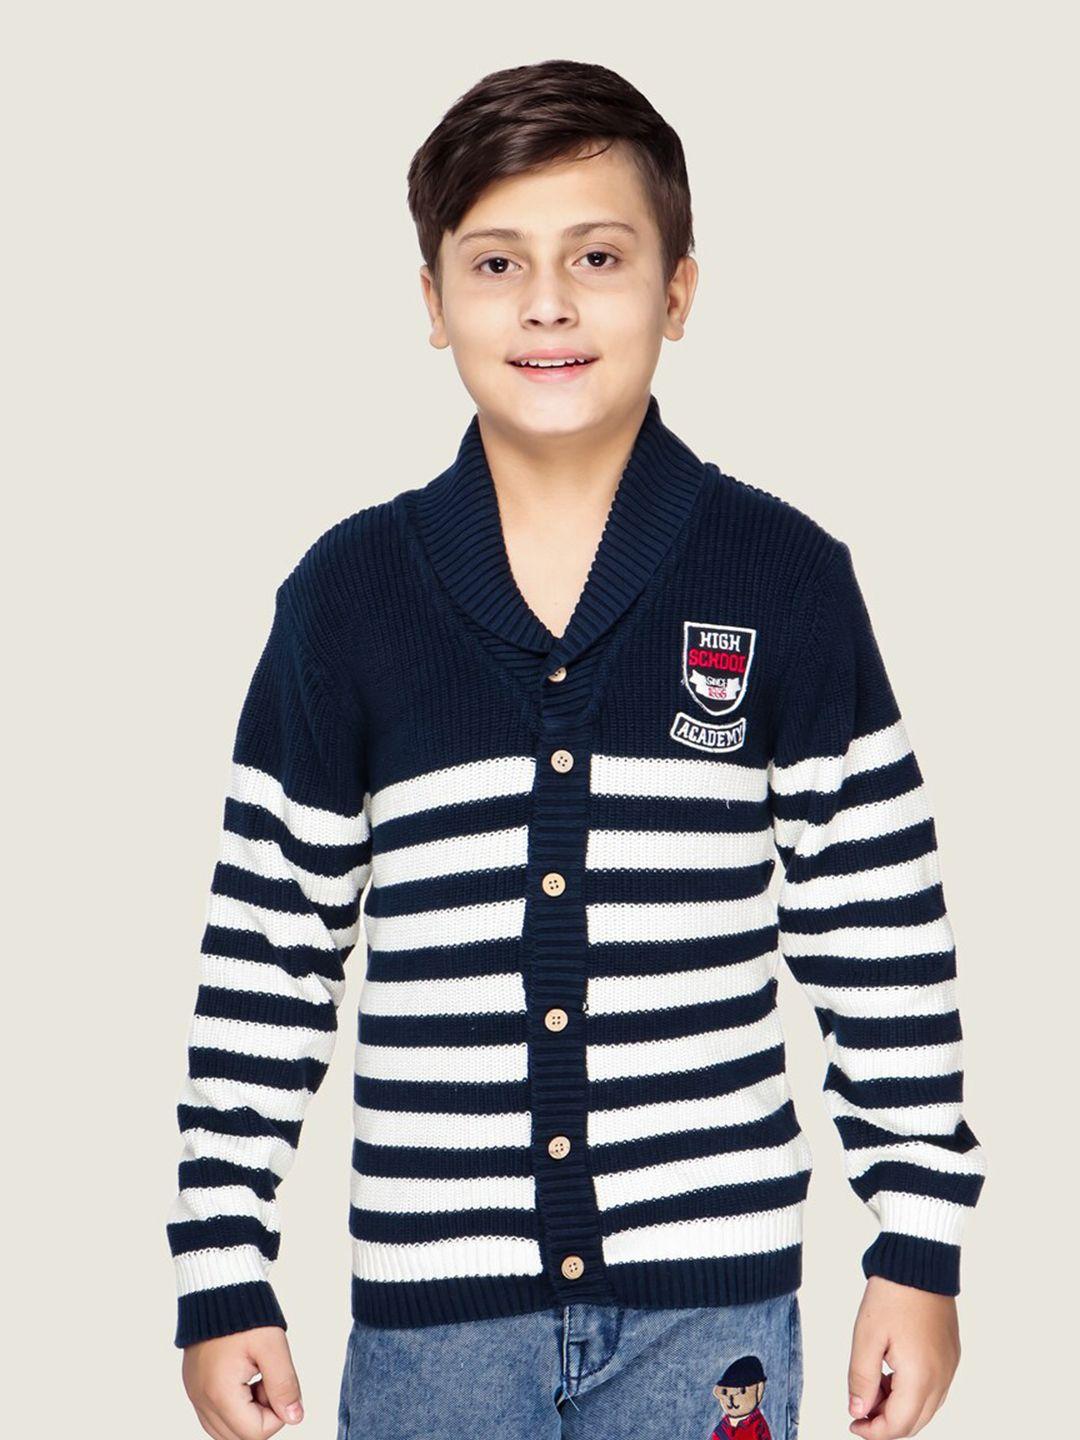 lasnak boys navy blue & white striped cardigan cotton pullover sweater